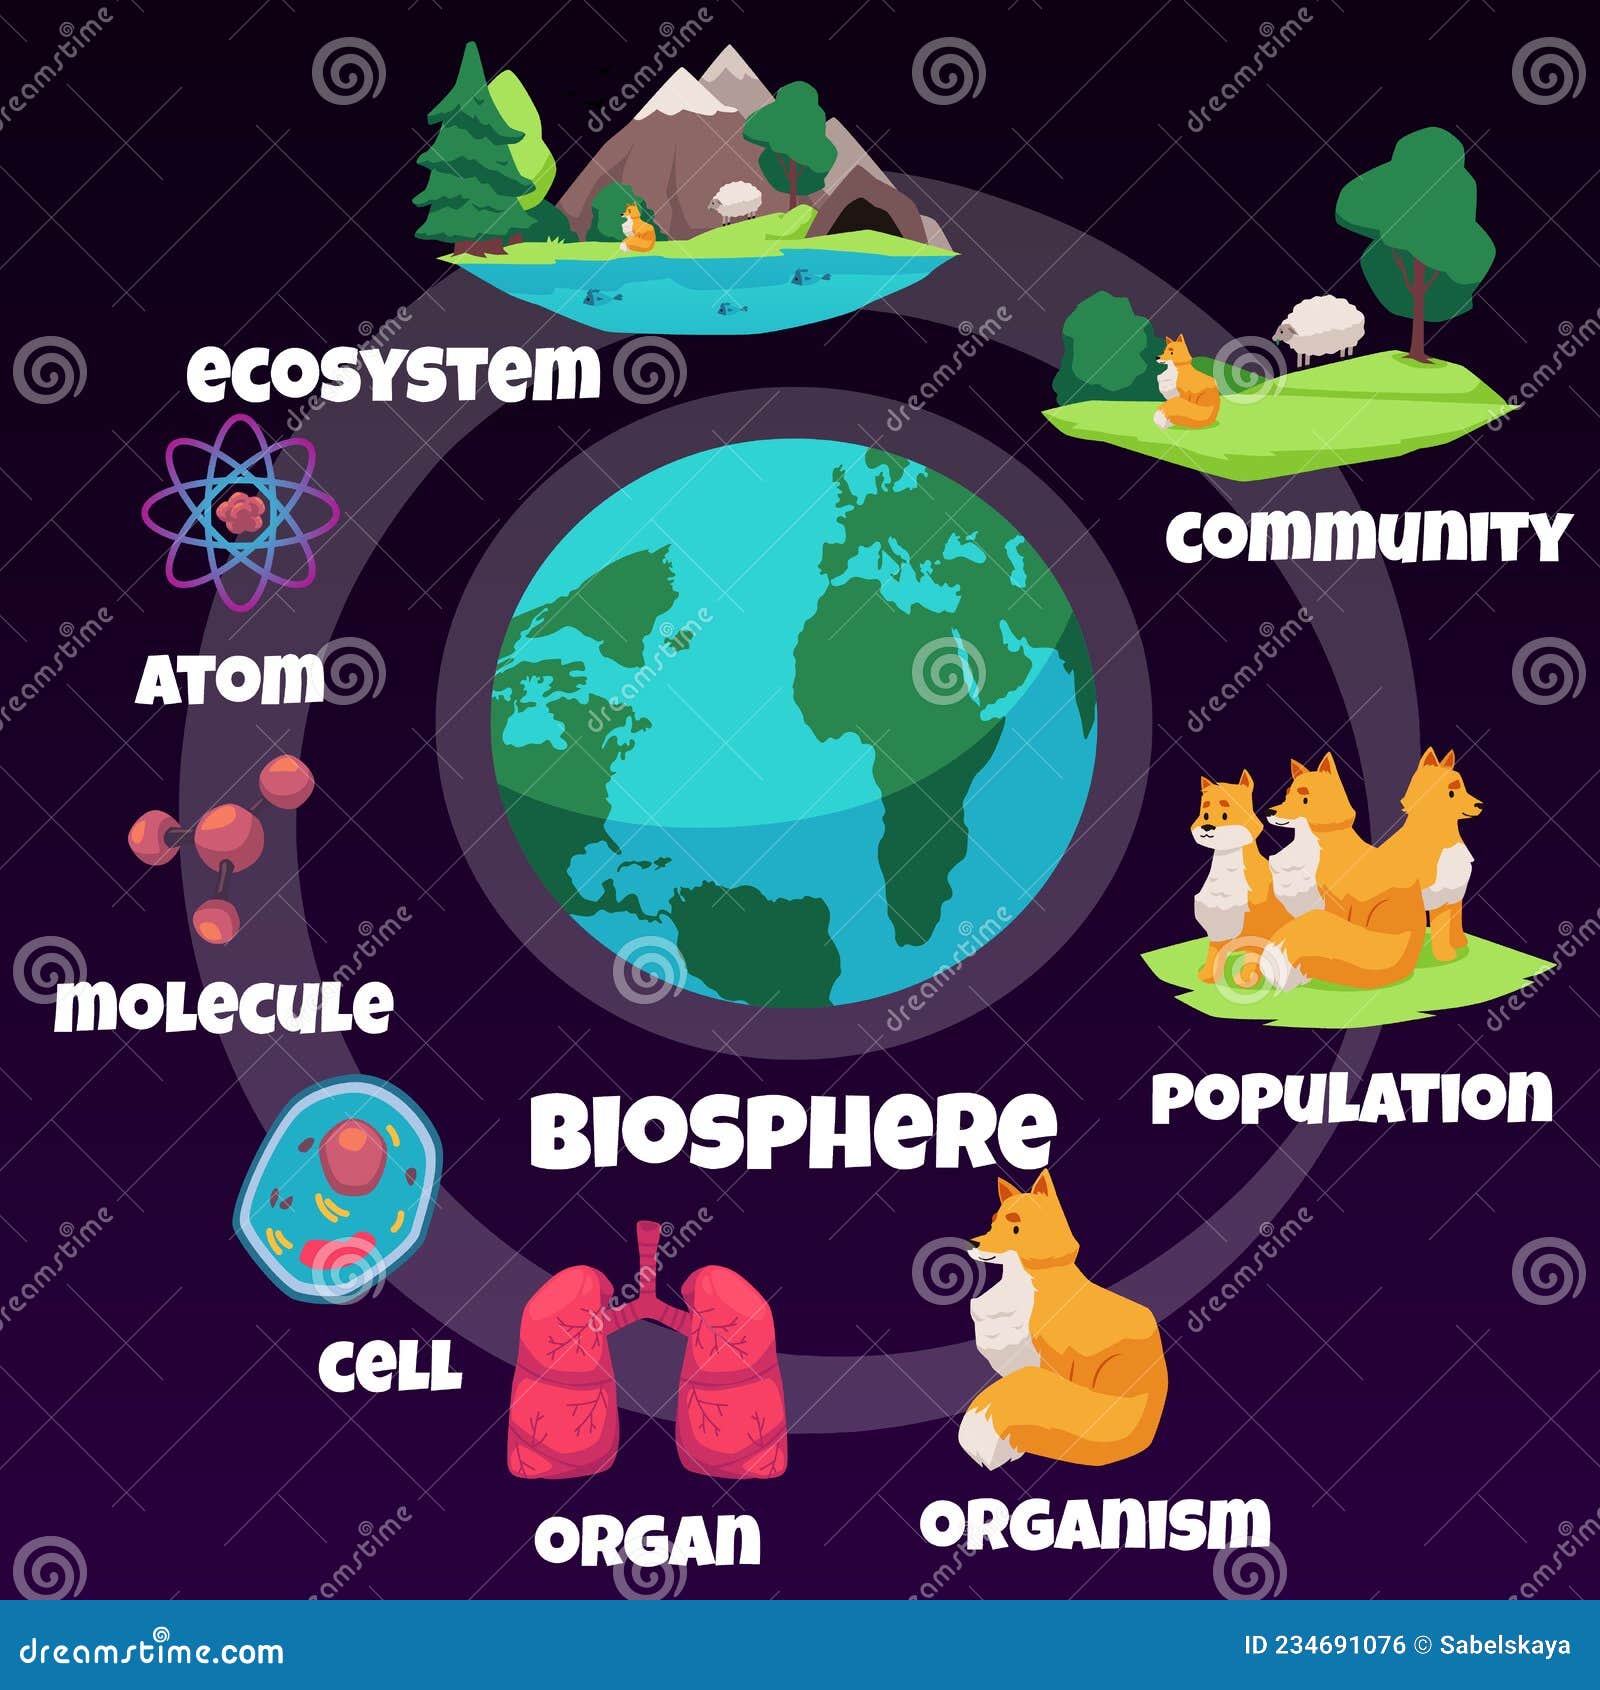 Biosphere ecology infographic for learning Vector Image